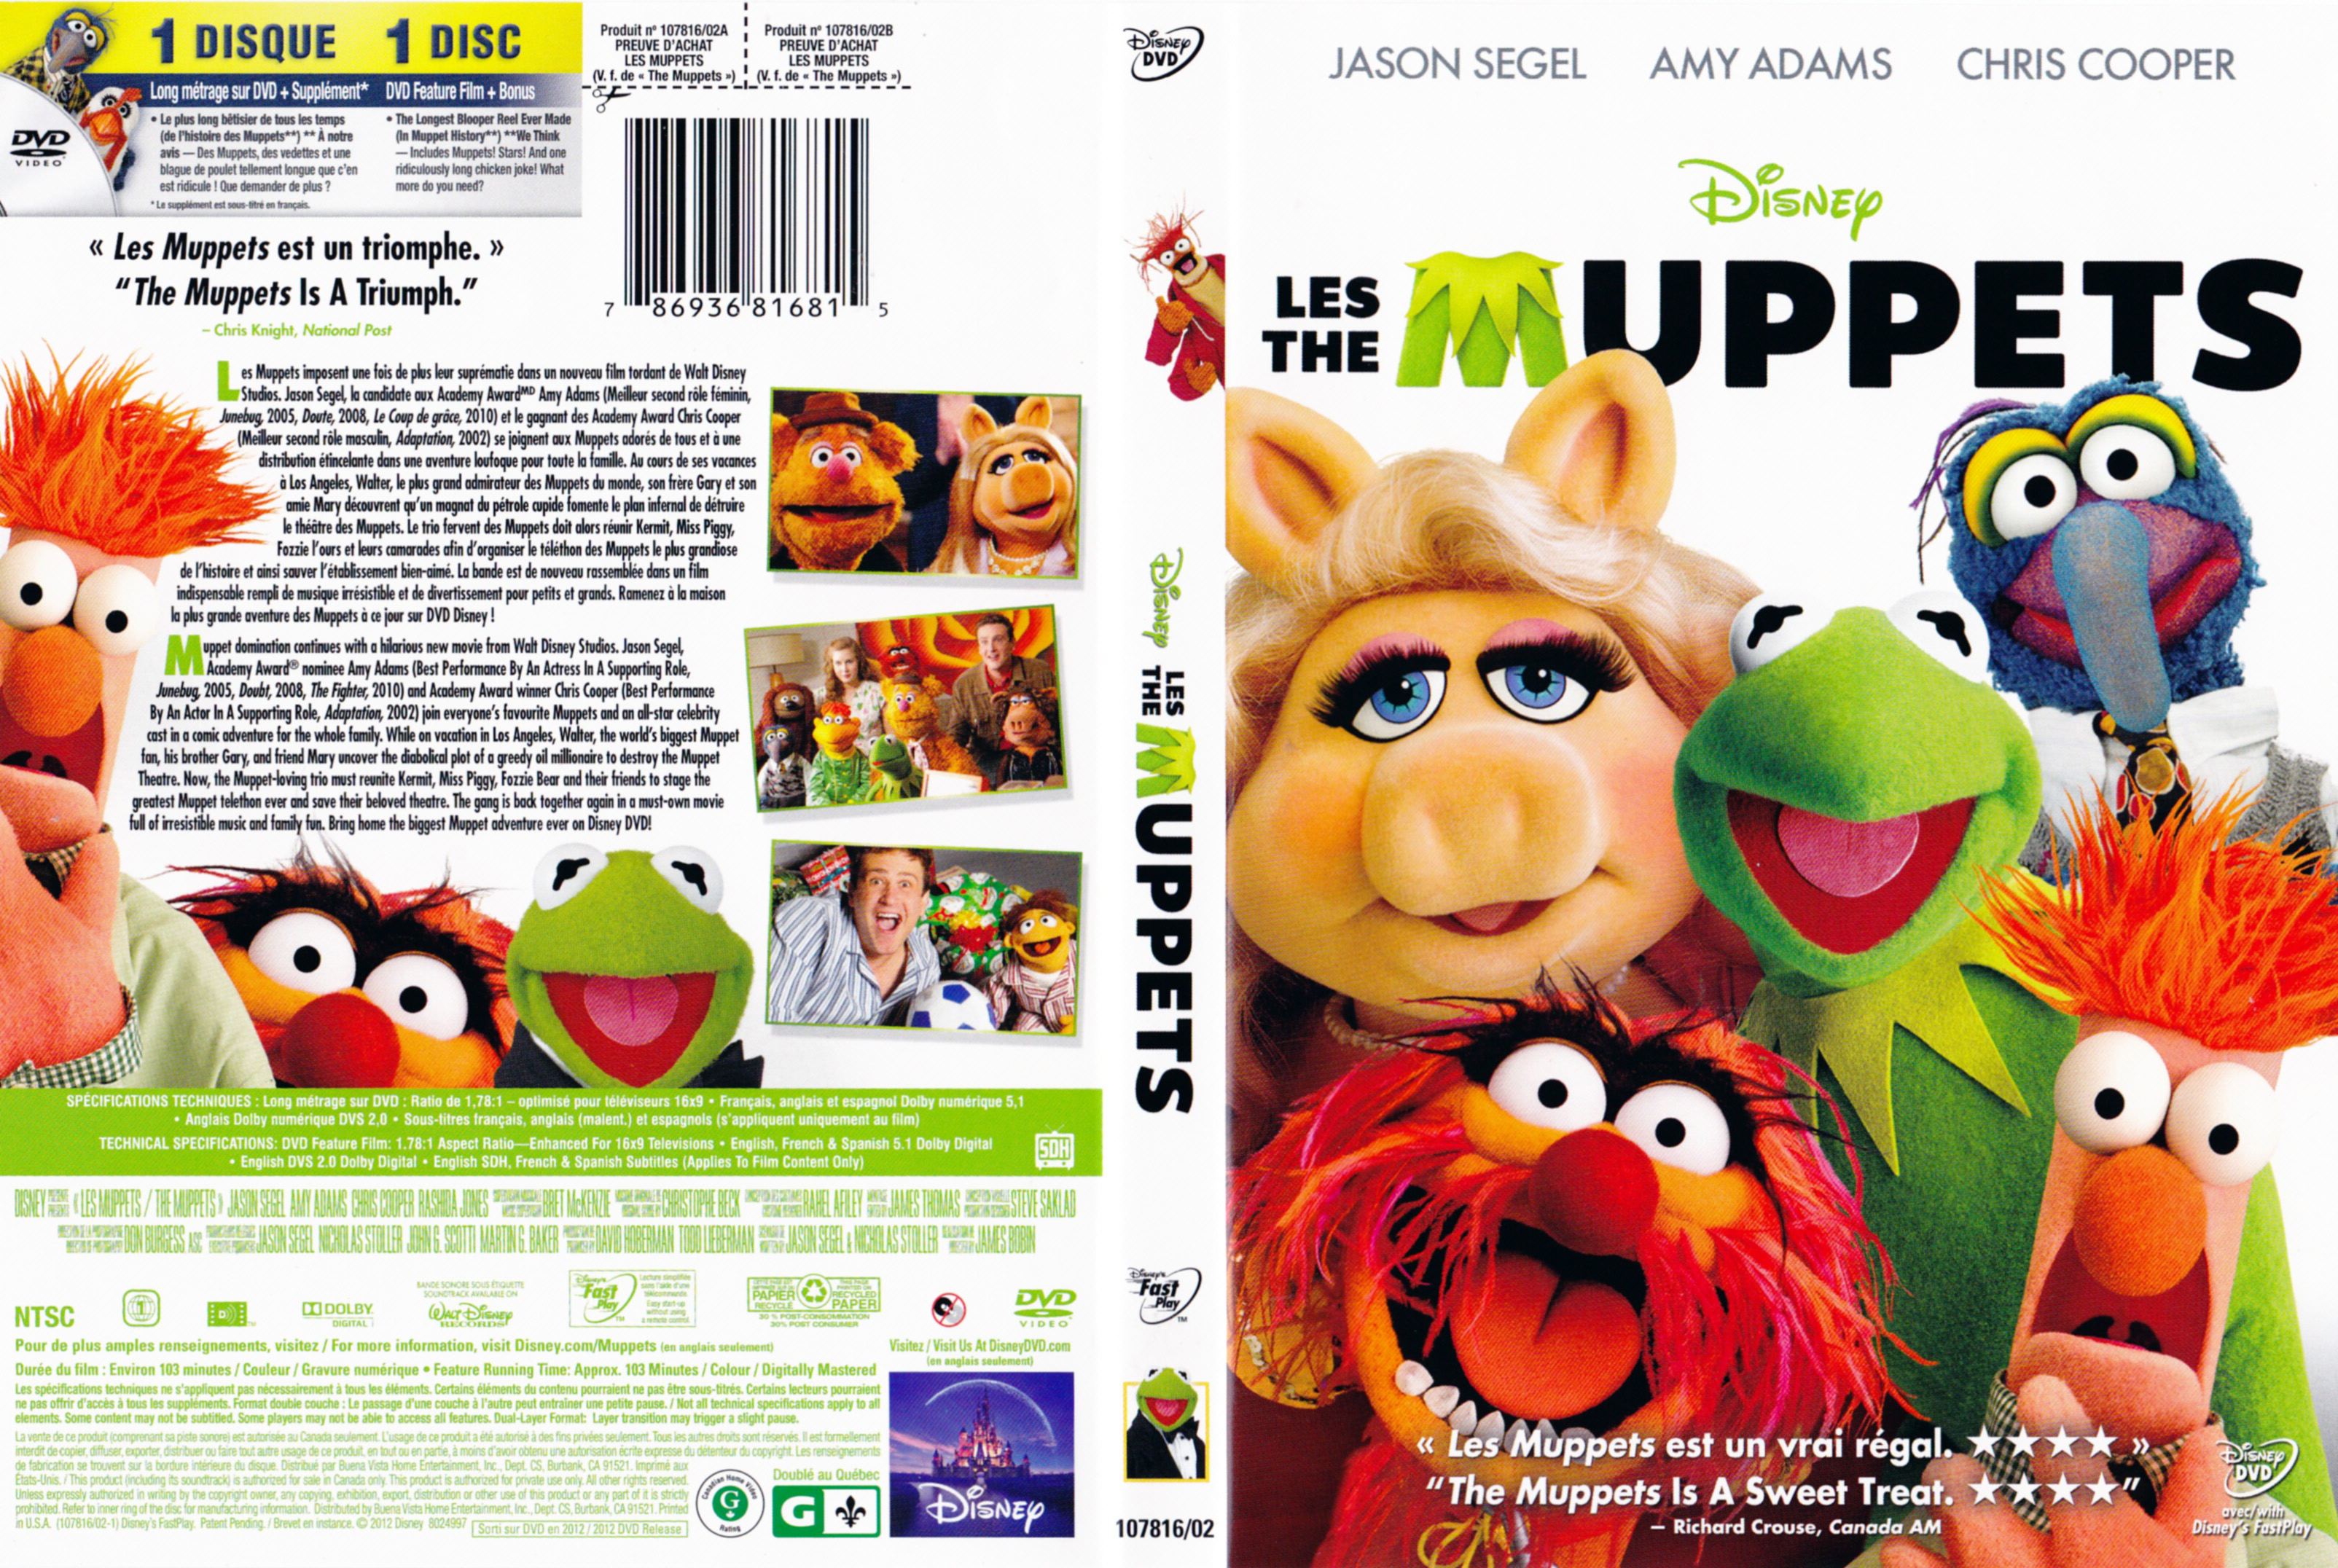 Jaquette DVD Les muppets - The muppets (Canadienne)